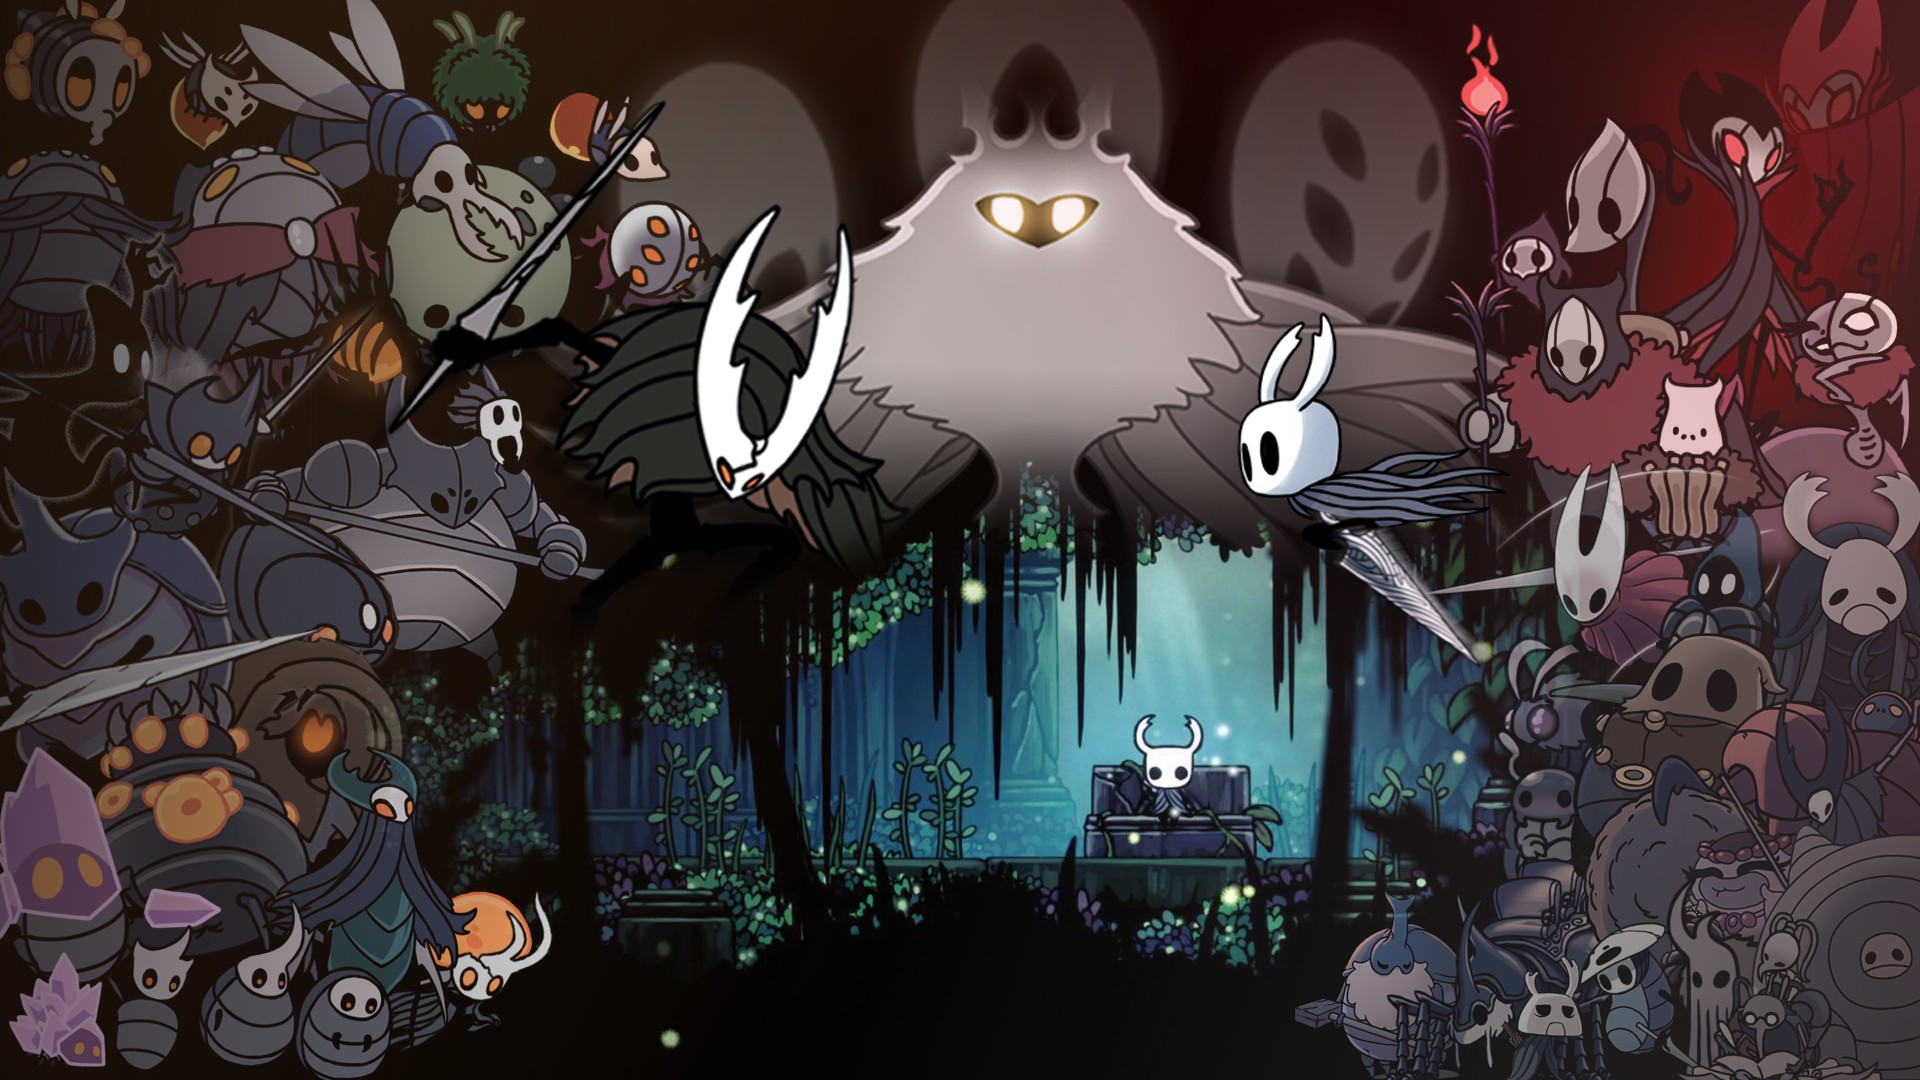 Hollow Knight Gameplay Wallpaper With high-resolution 1920X1080 pixel. You can use this wallpaper for your Windows and Mac OS computers as well as your Android and iPhone smartphones